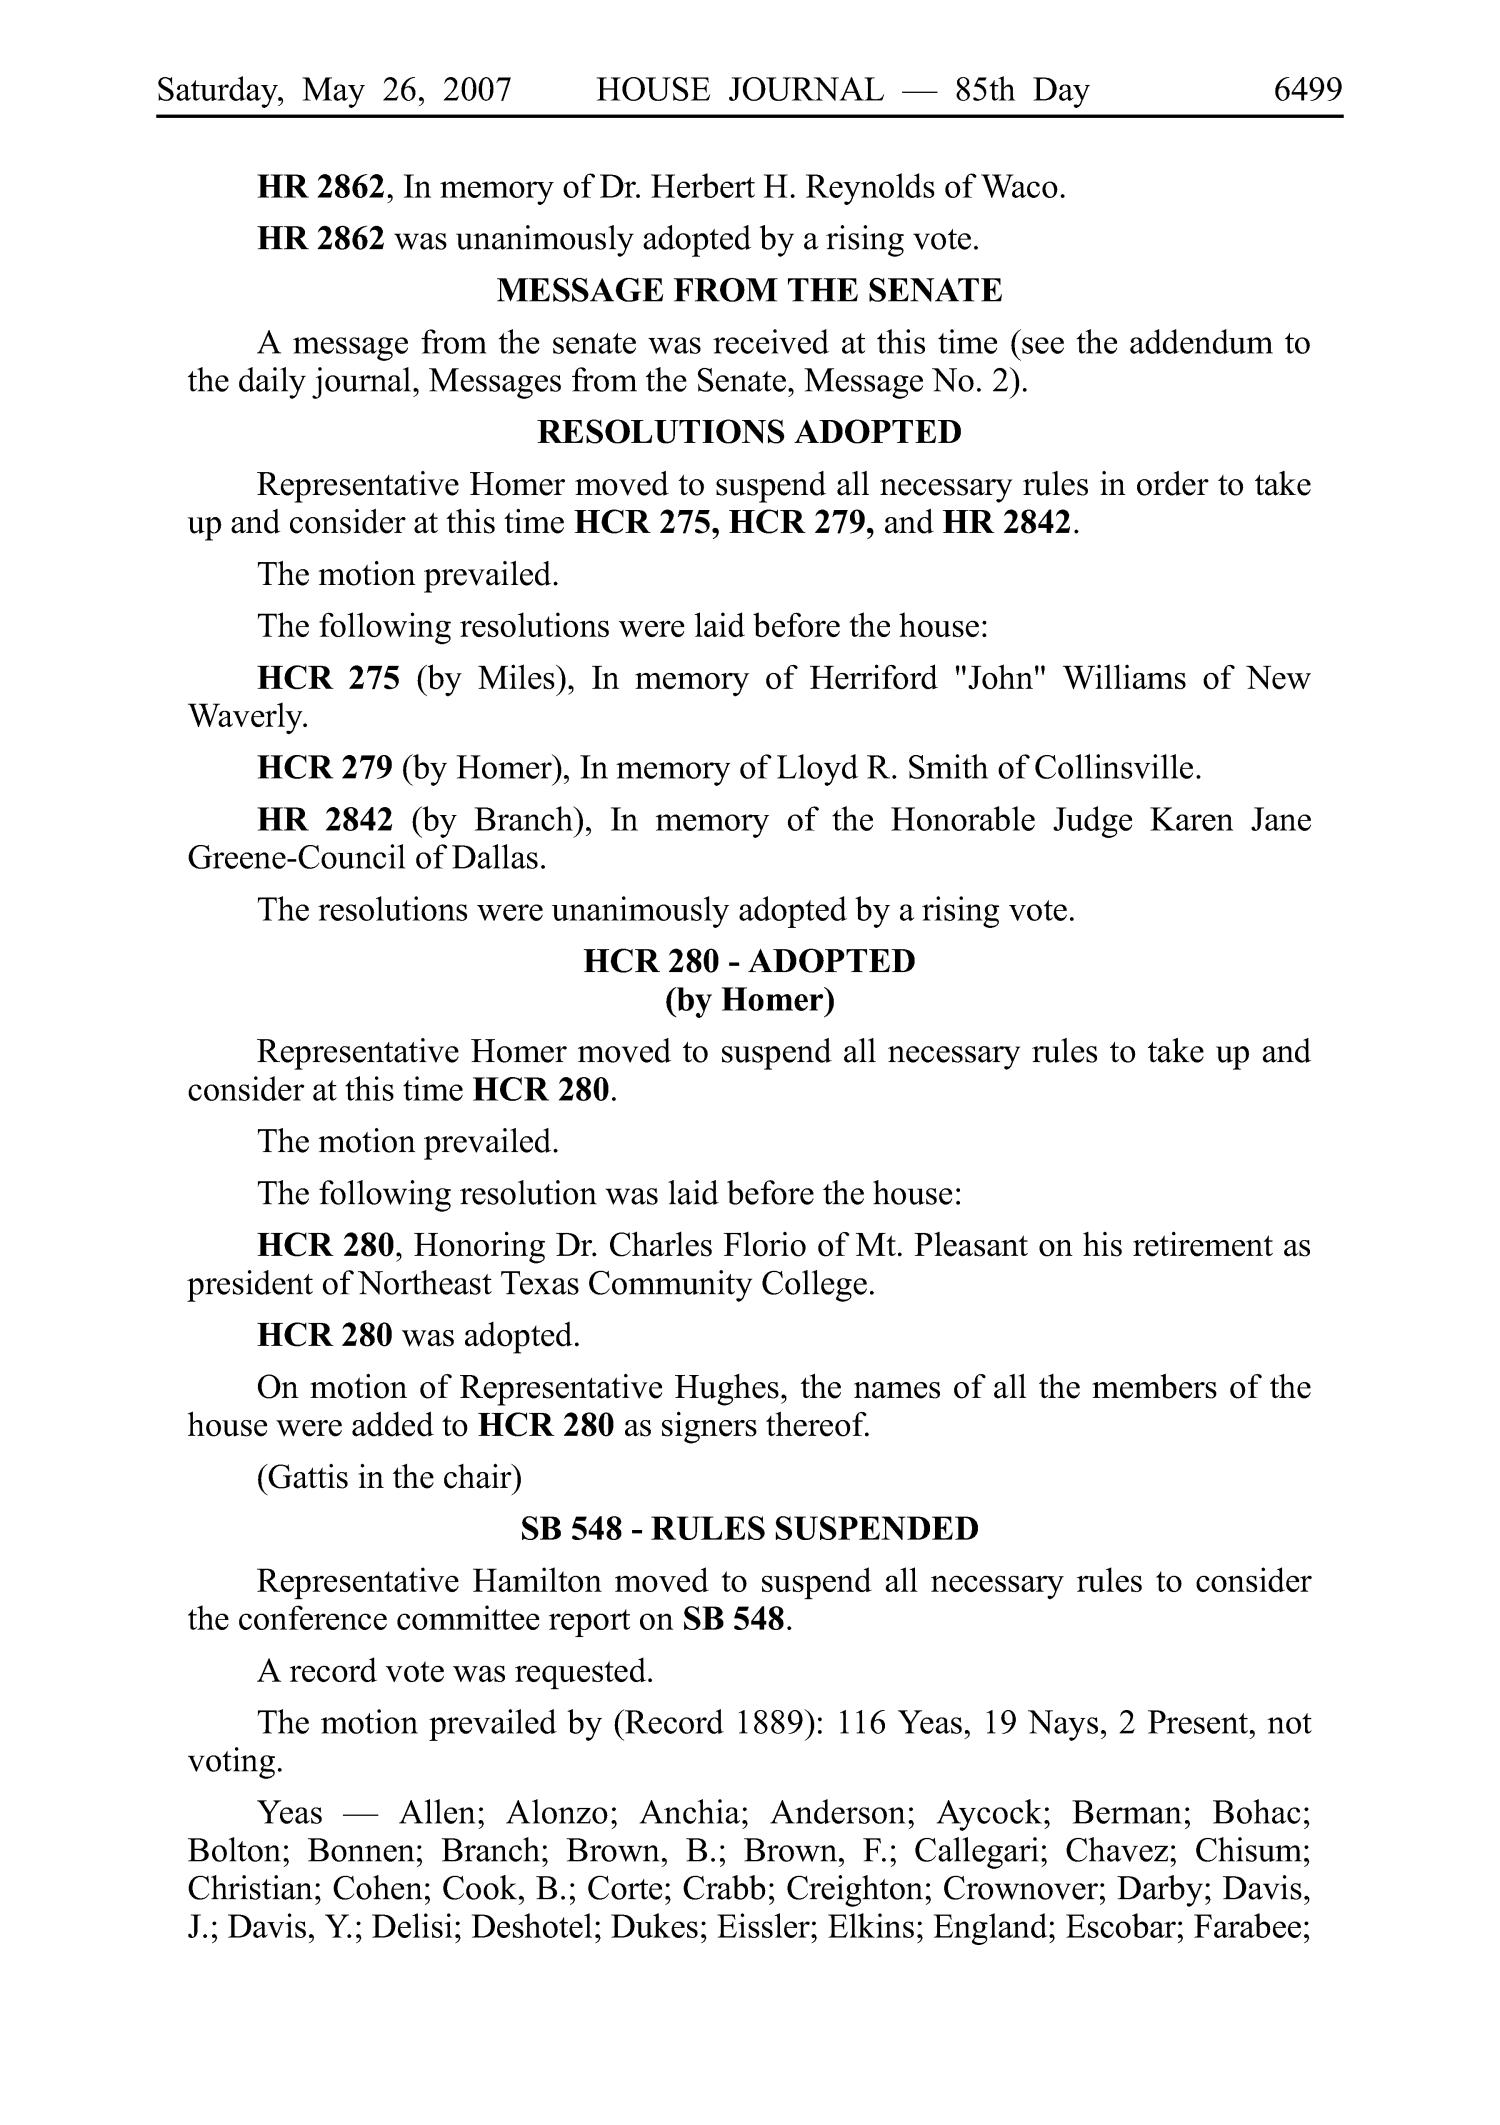 Journal of the House of Representatives of the Regular Session of the Eightieth Legislature of the State of Texas, Volume 6
                                                
                                                    6499
                                                